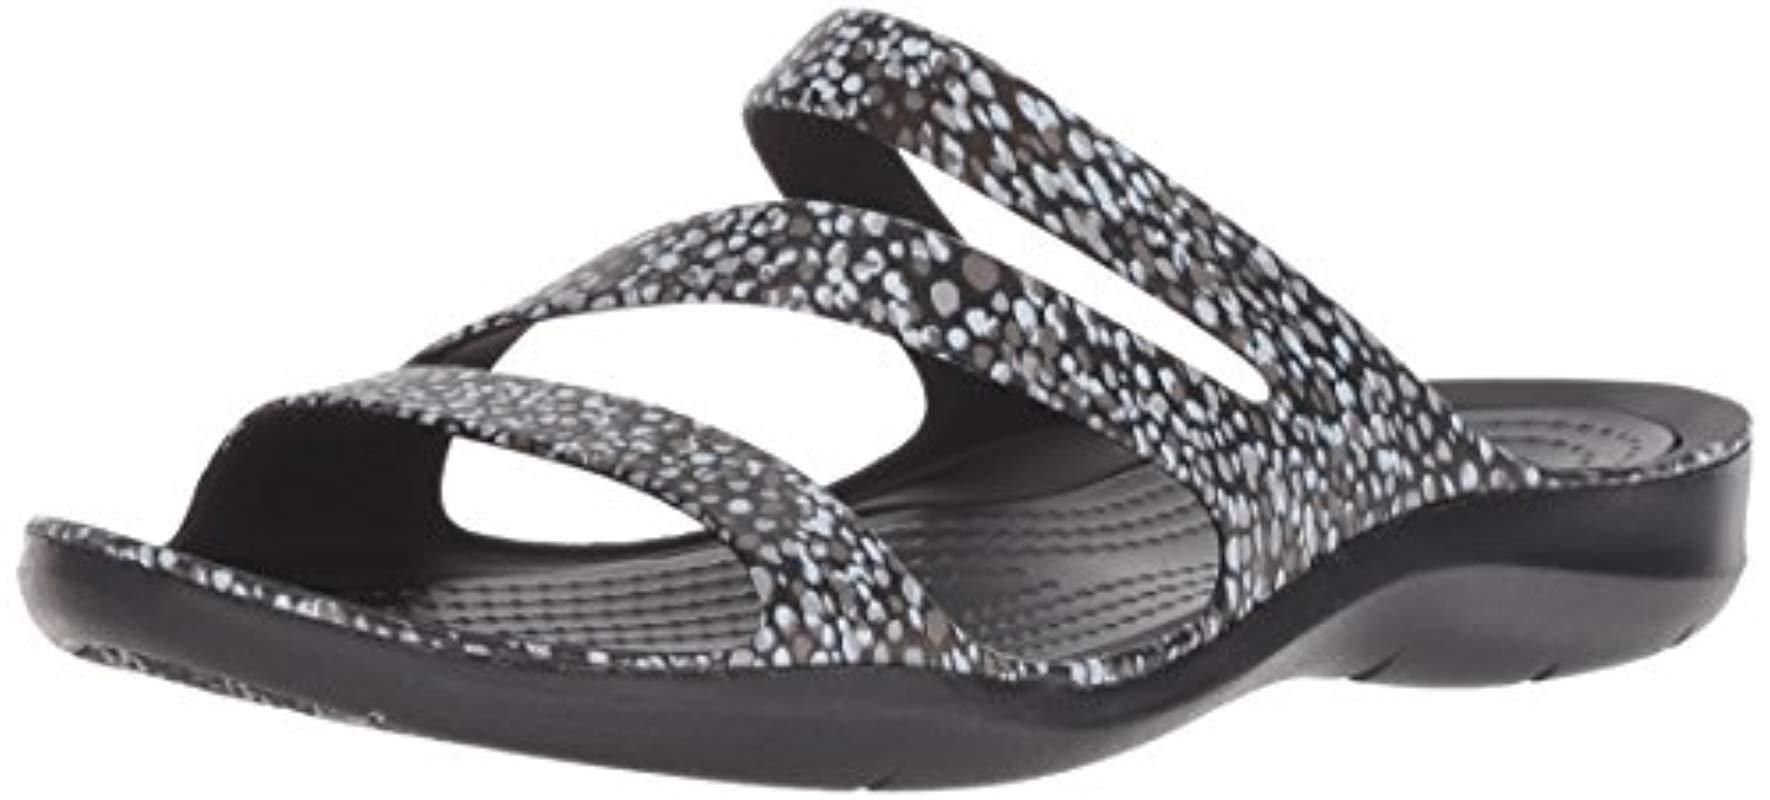 Crocs™ Swiftwater Graphic Sandal - Lyst